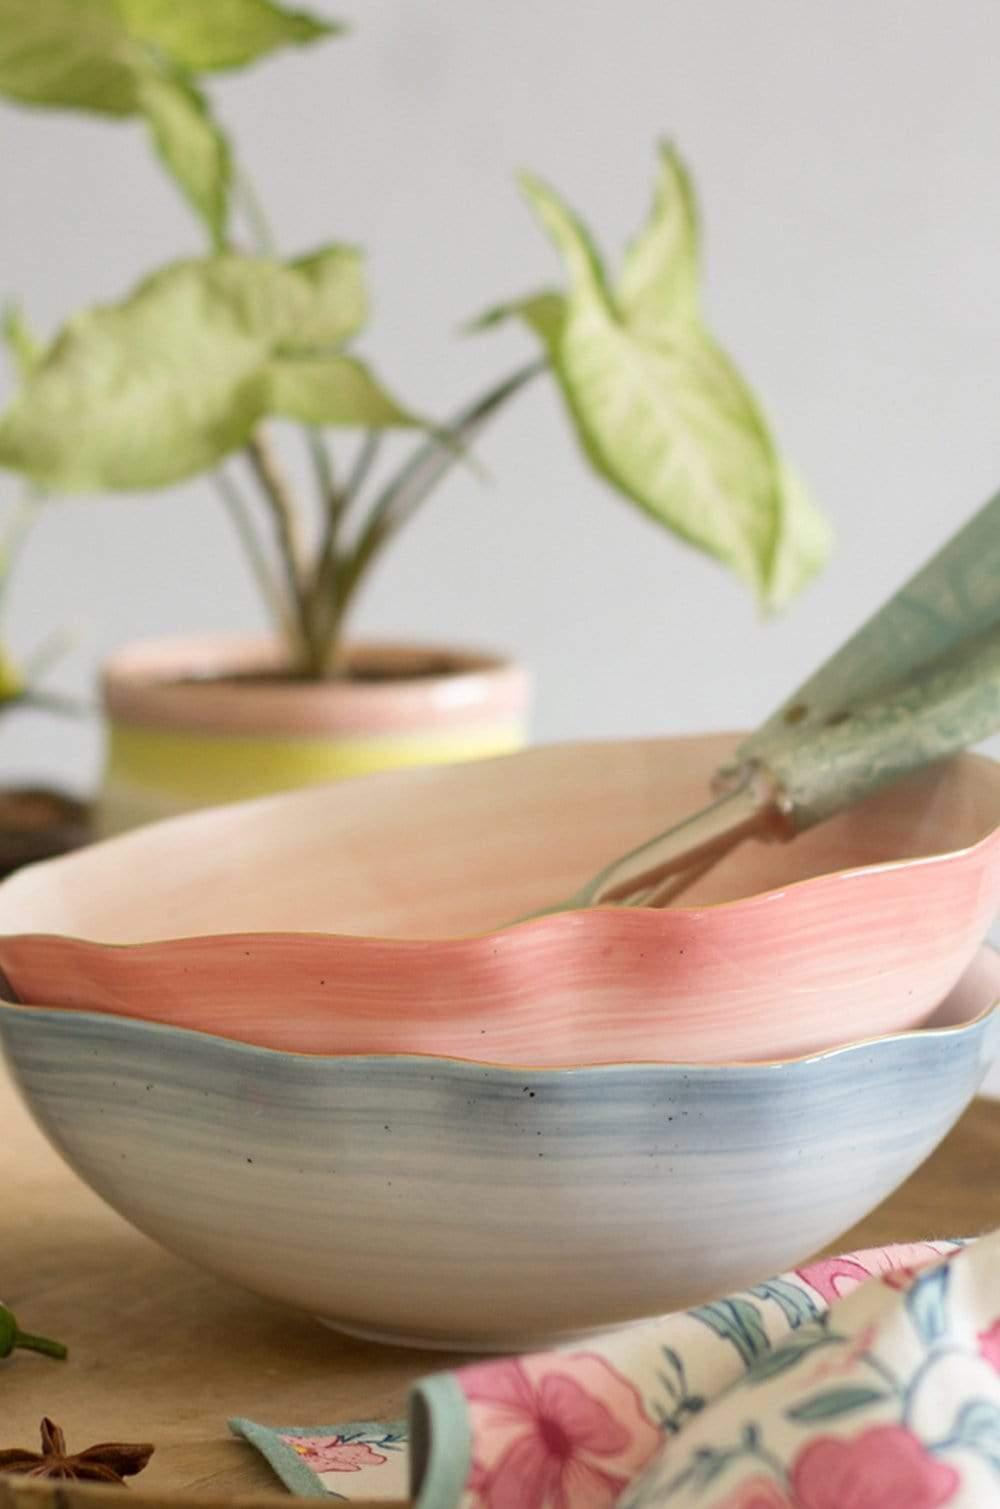 Watercolor Magic Bowl - Cerrulean BlueMaterial: CeramicsDimensions: 22d cm x 7h cmDishwasher safe, Gold rim is not Microwave safe, Do not scrub with steel wool.Will chip or break on impactOur products arWatercolor Magic Bowl - Cerrulean Blue